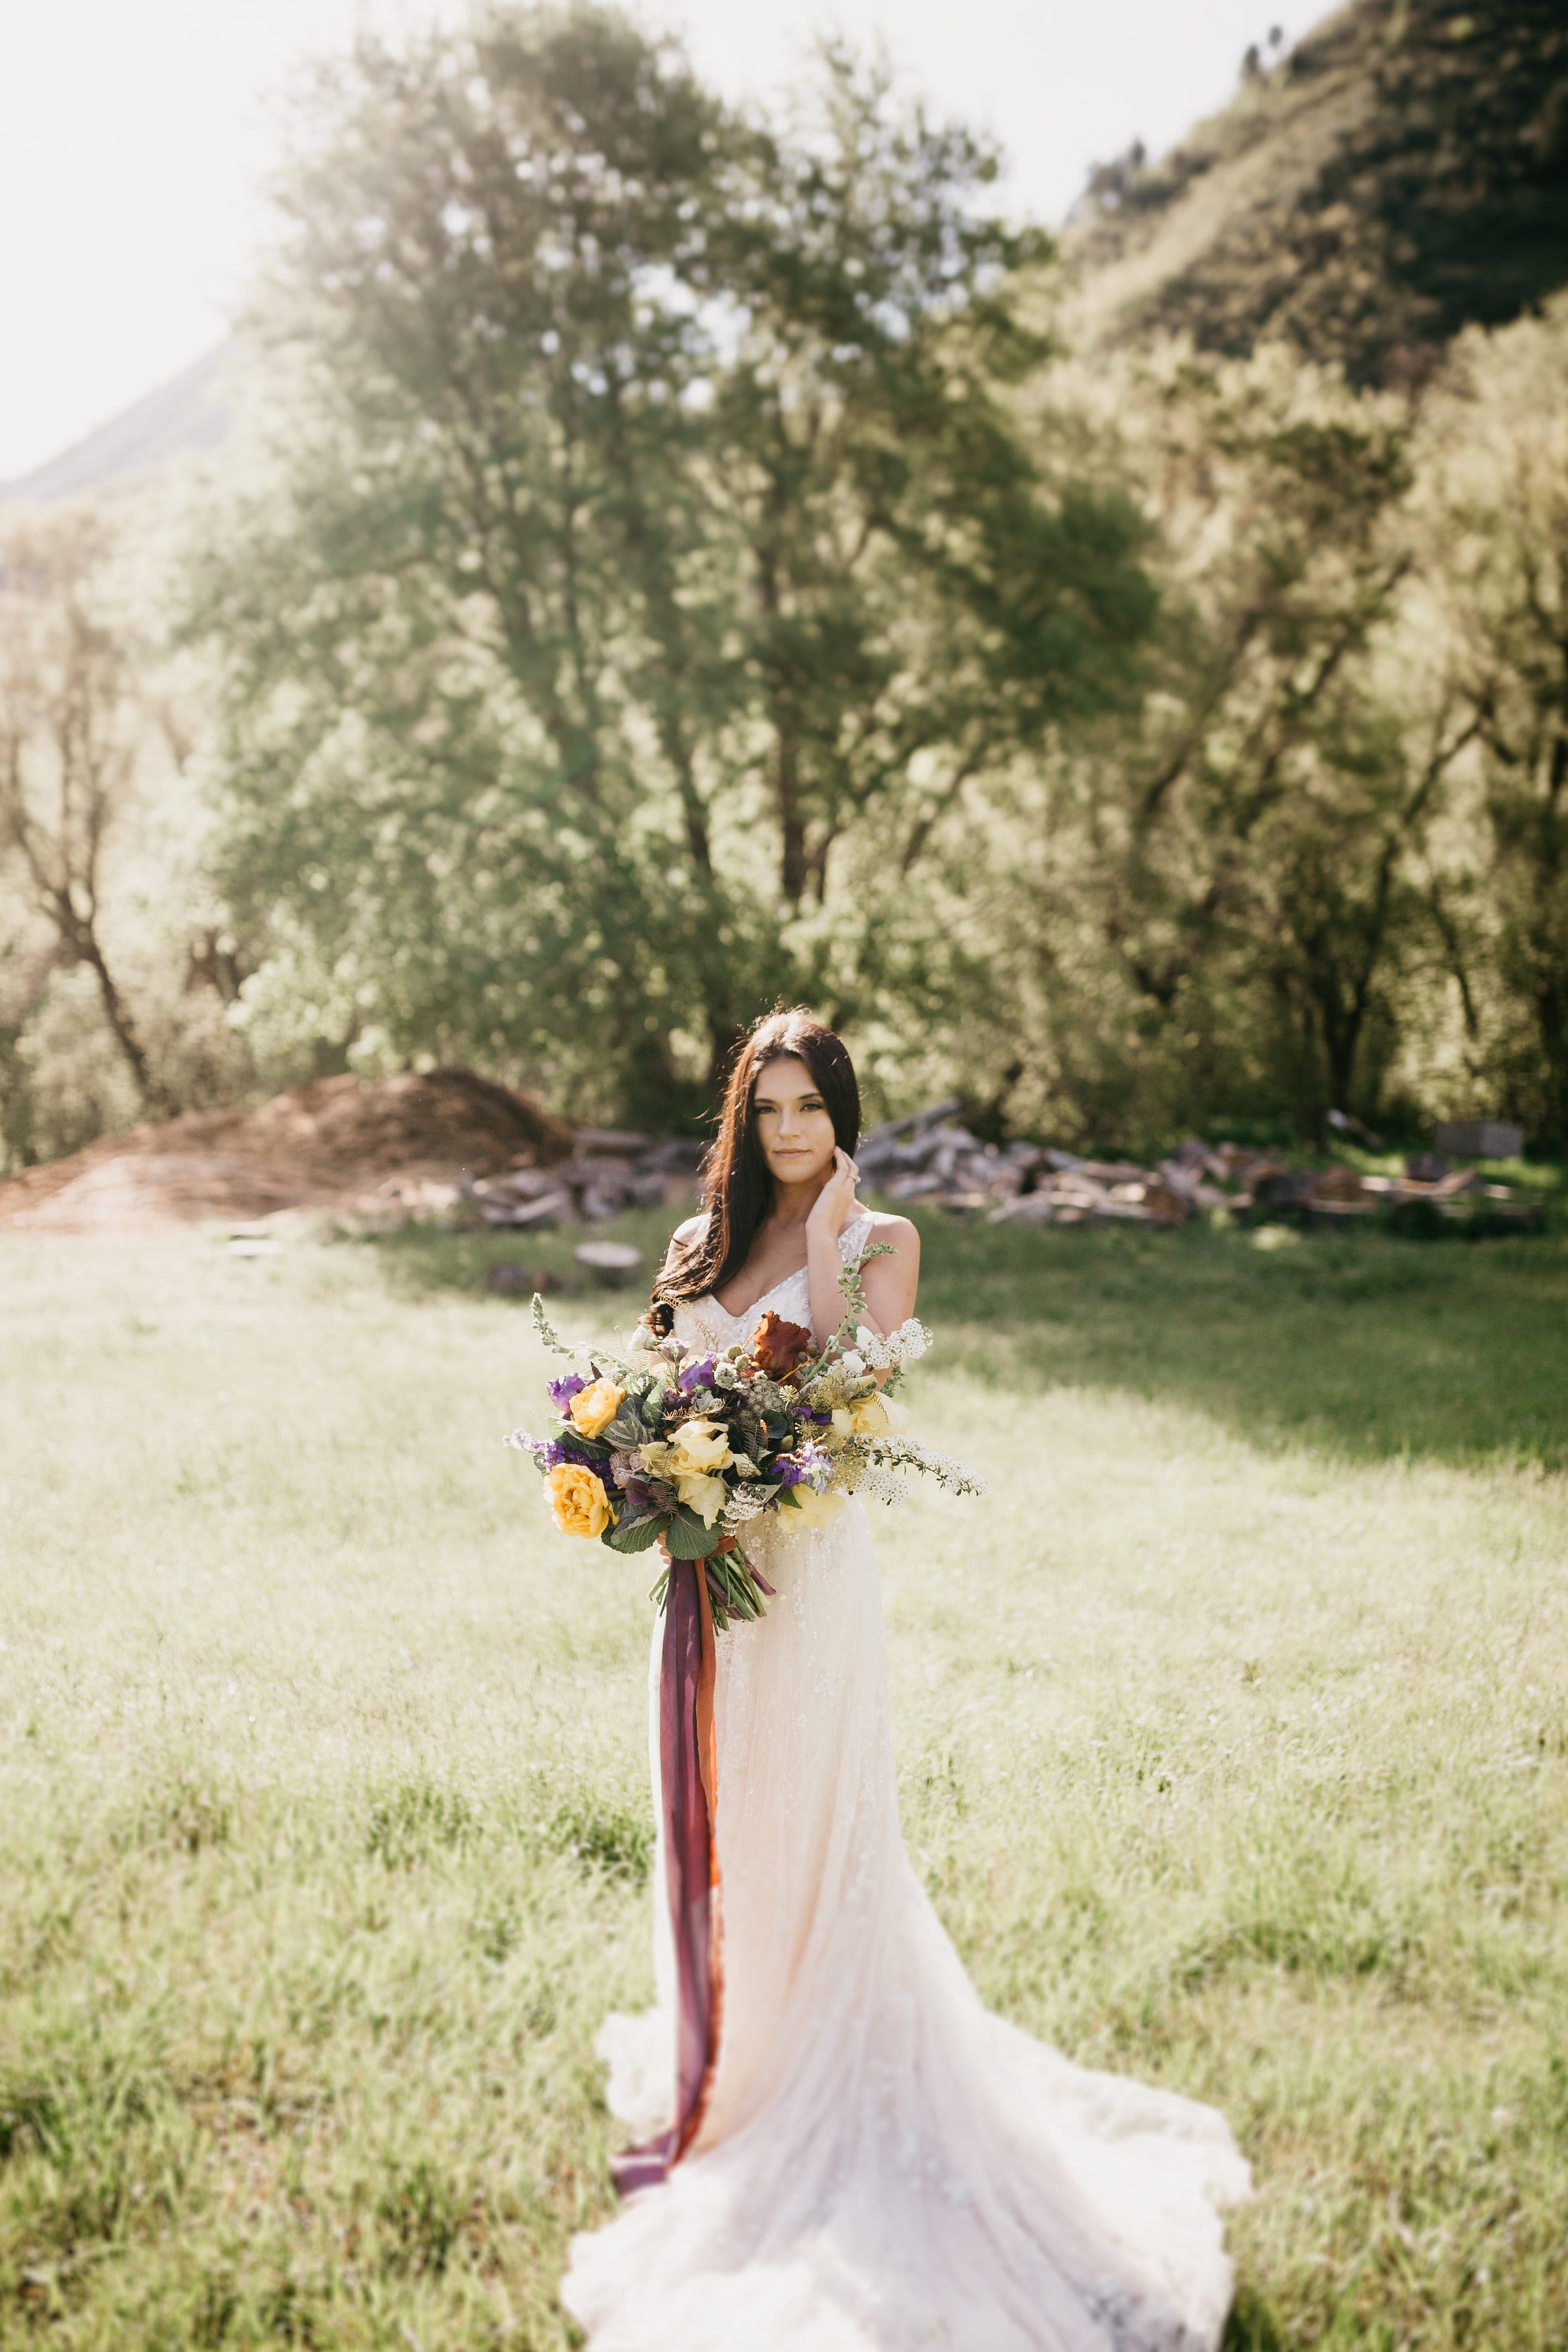 Earthy and Romantic Styled Shoot with Breathtaking Florals in Outdoor Wedding | Maggie Sottero's Jorie wedding dress